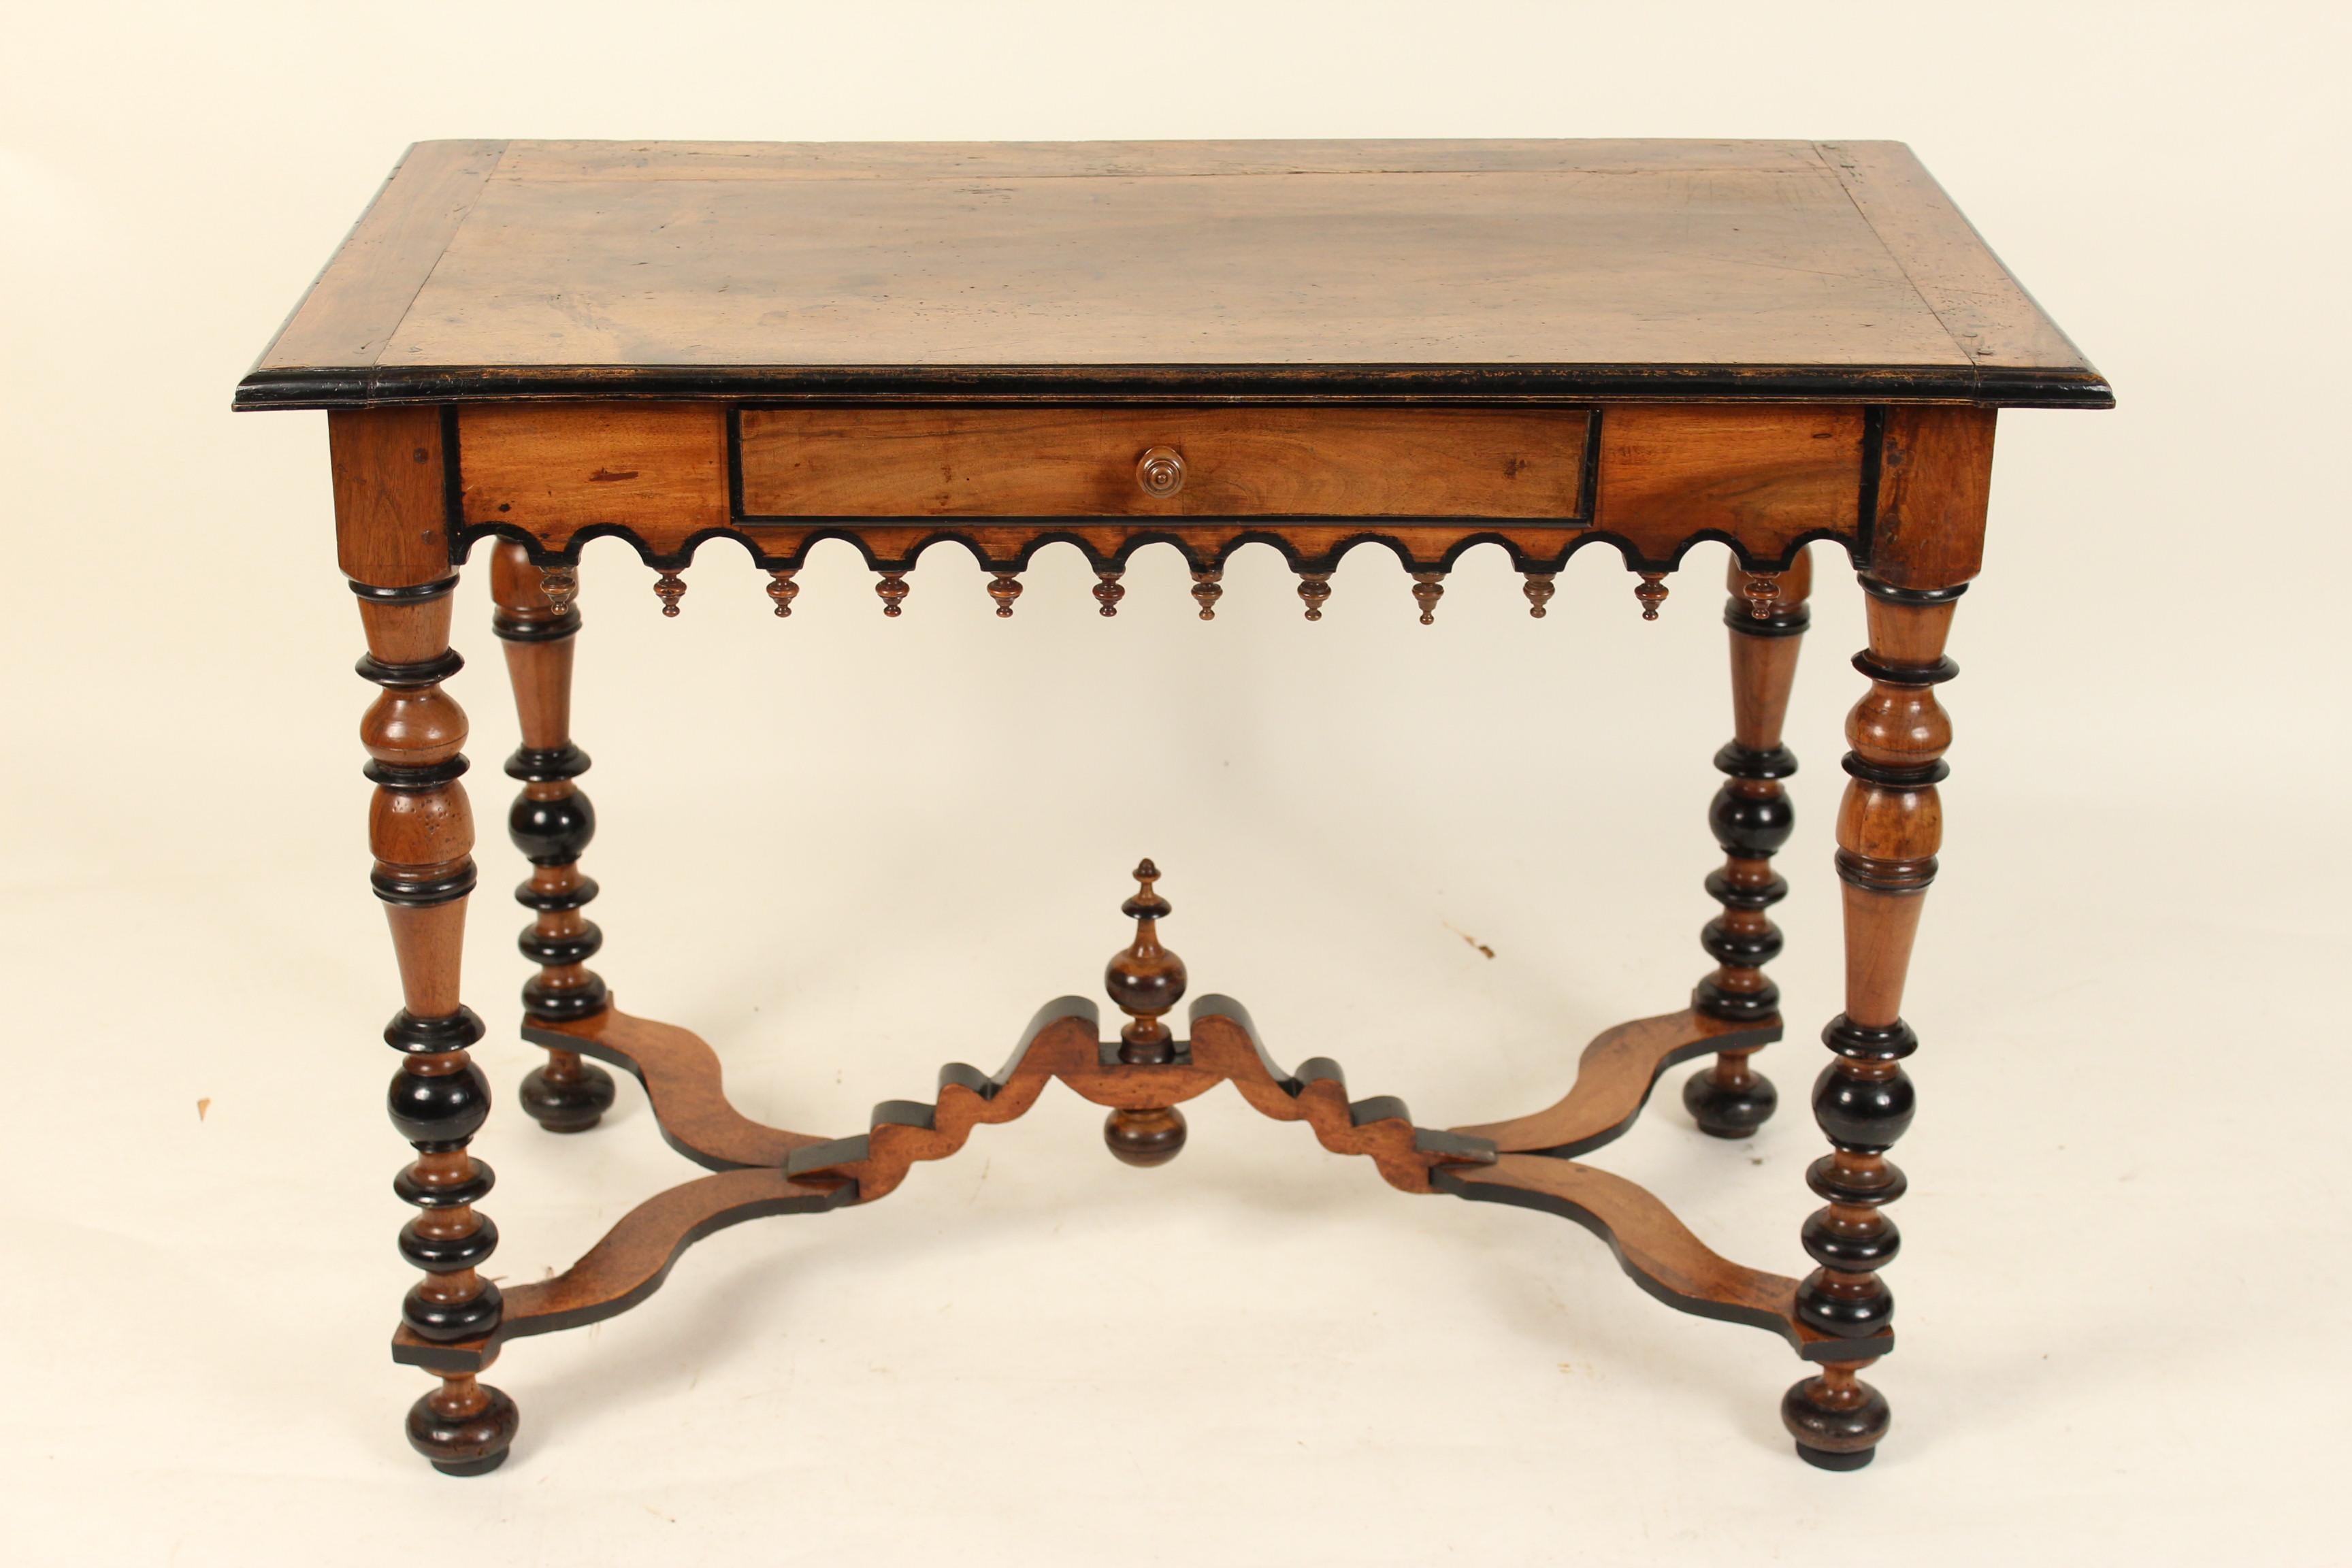 Continental antique Louis XIV style walnut writing / occasional table, 19th century. With a nice old patina and ebonized trim.